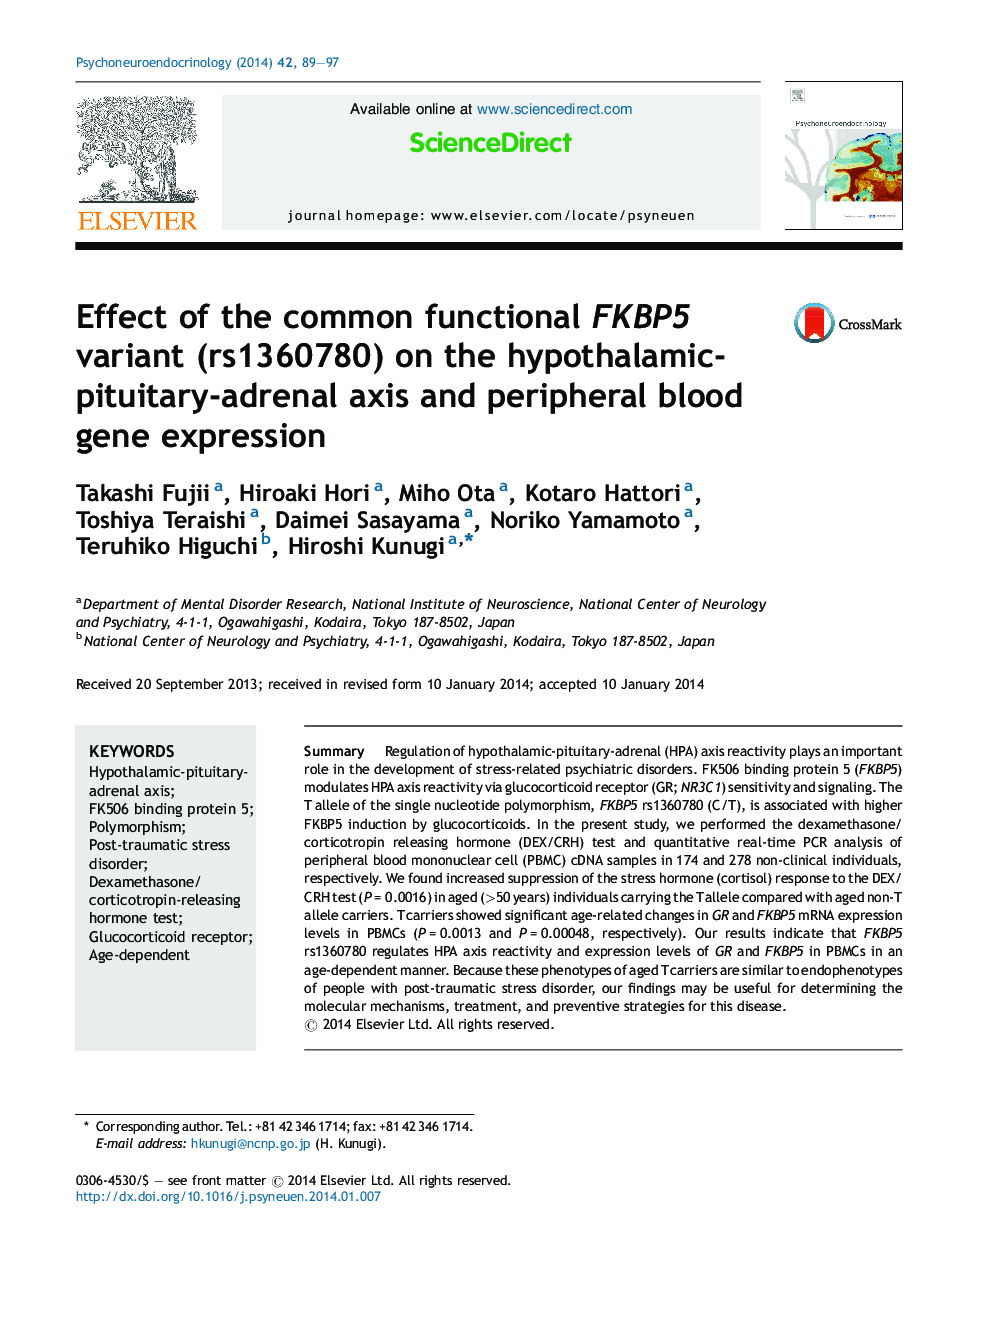 Effect of the common functional FKBP5 variant (rs1360780) on the hypothalamic-pituitary-adrenal axis and peripheral blood gene expression